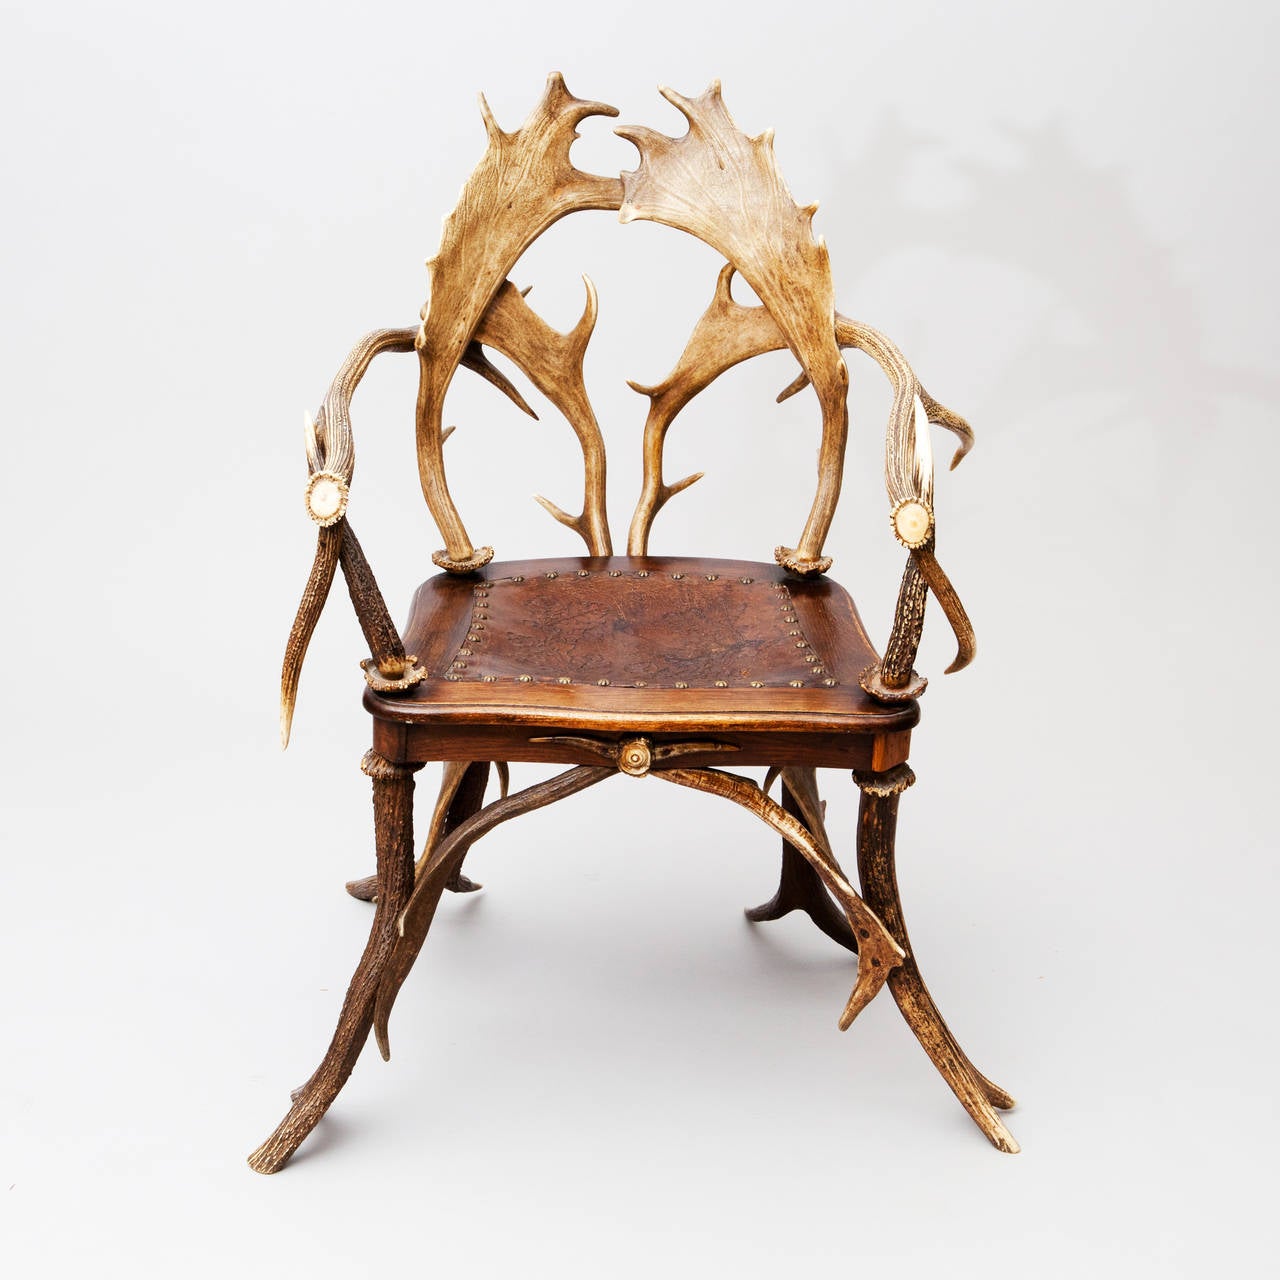 This superb antique Blackforest armchair is crafted from Red Stag and Fallow Deer Antlers. This is one of the original chairs of this design which are still made today. The smoothed surface and patina of this chair are very attractive and it is